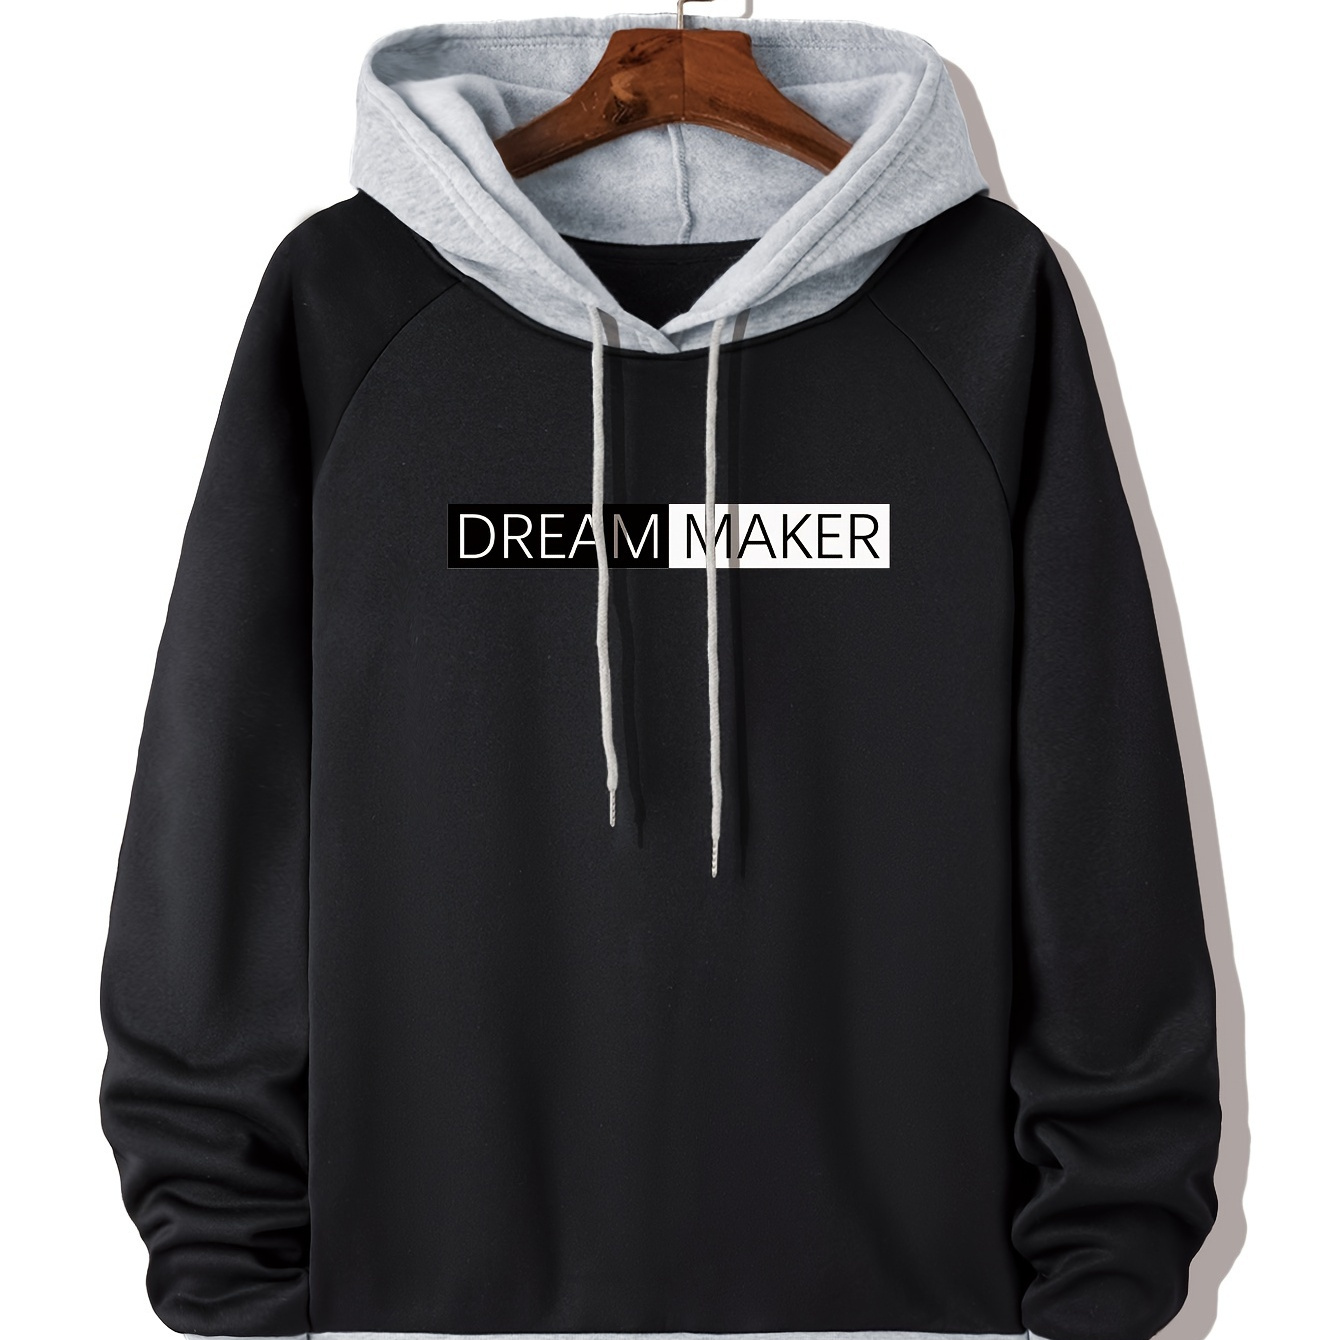 

Men's Casual Dreammaker Letters Graphic Print Hoodies, Drawstring Comfortable Oversized Hooded Pullover Sweatshirt For Spring Summer Plus Size